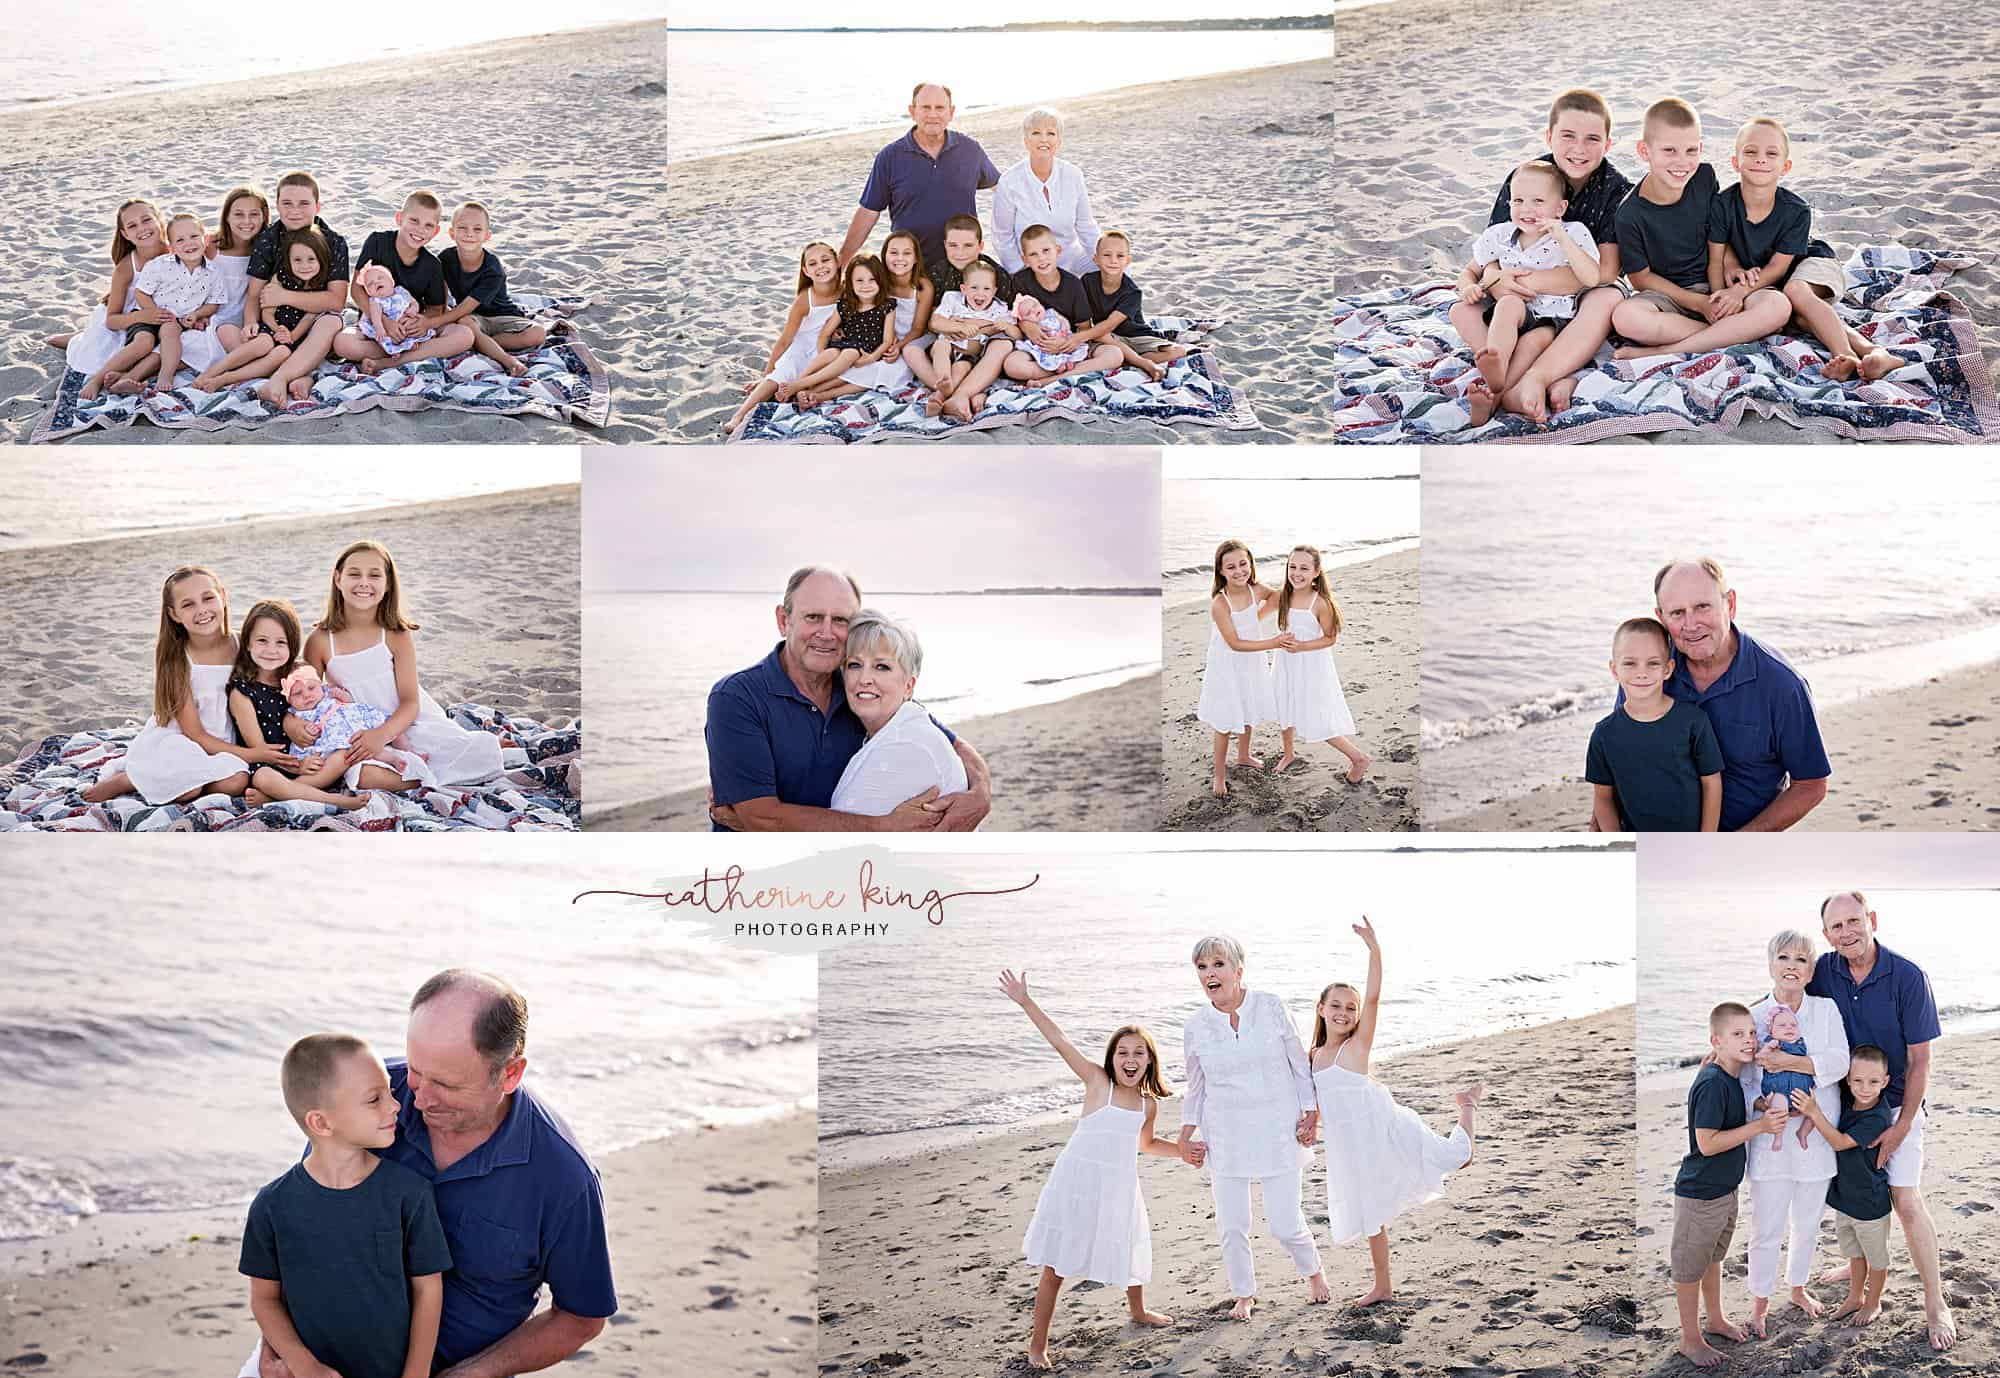 Stunning externded family photography session at the beach